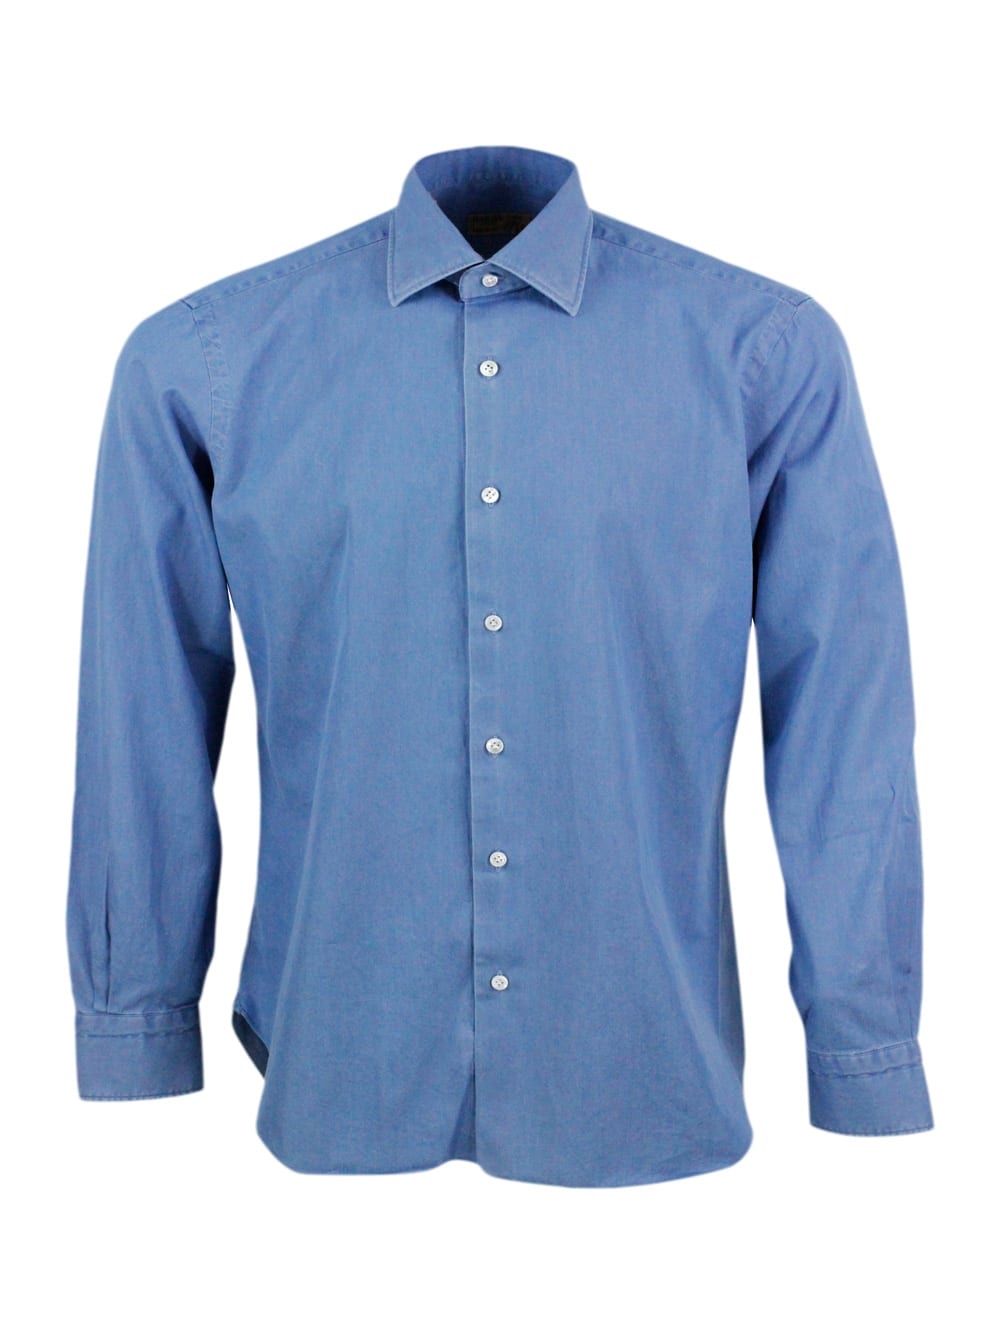 Dandylife Shirt In Light Denim With Hand-stitched Italian Collar And Mother-of-pearl Buttons